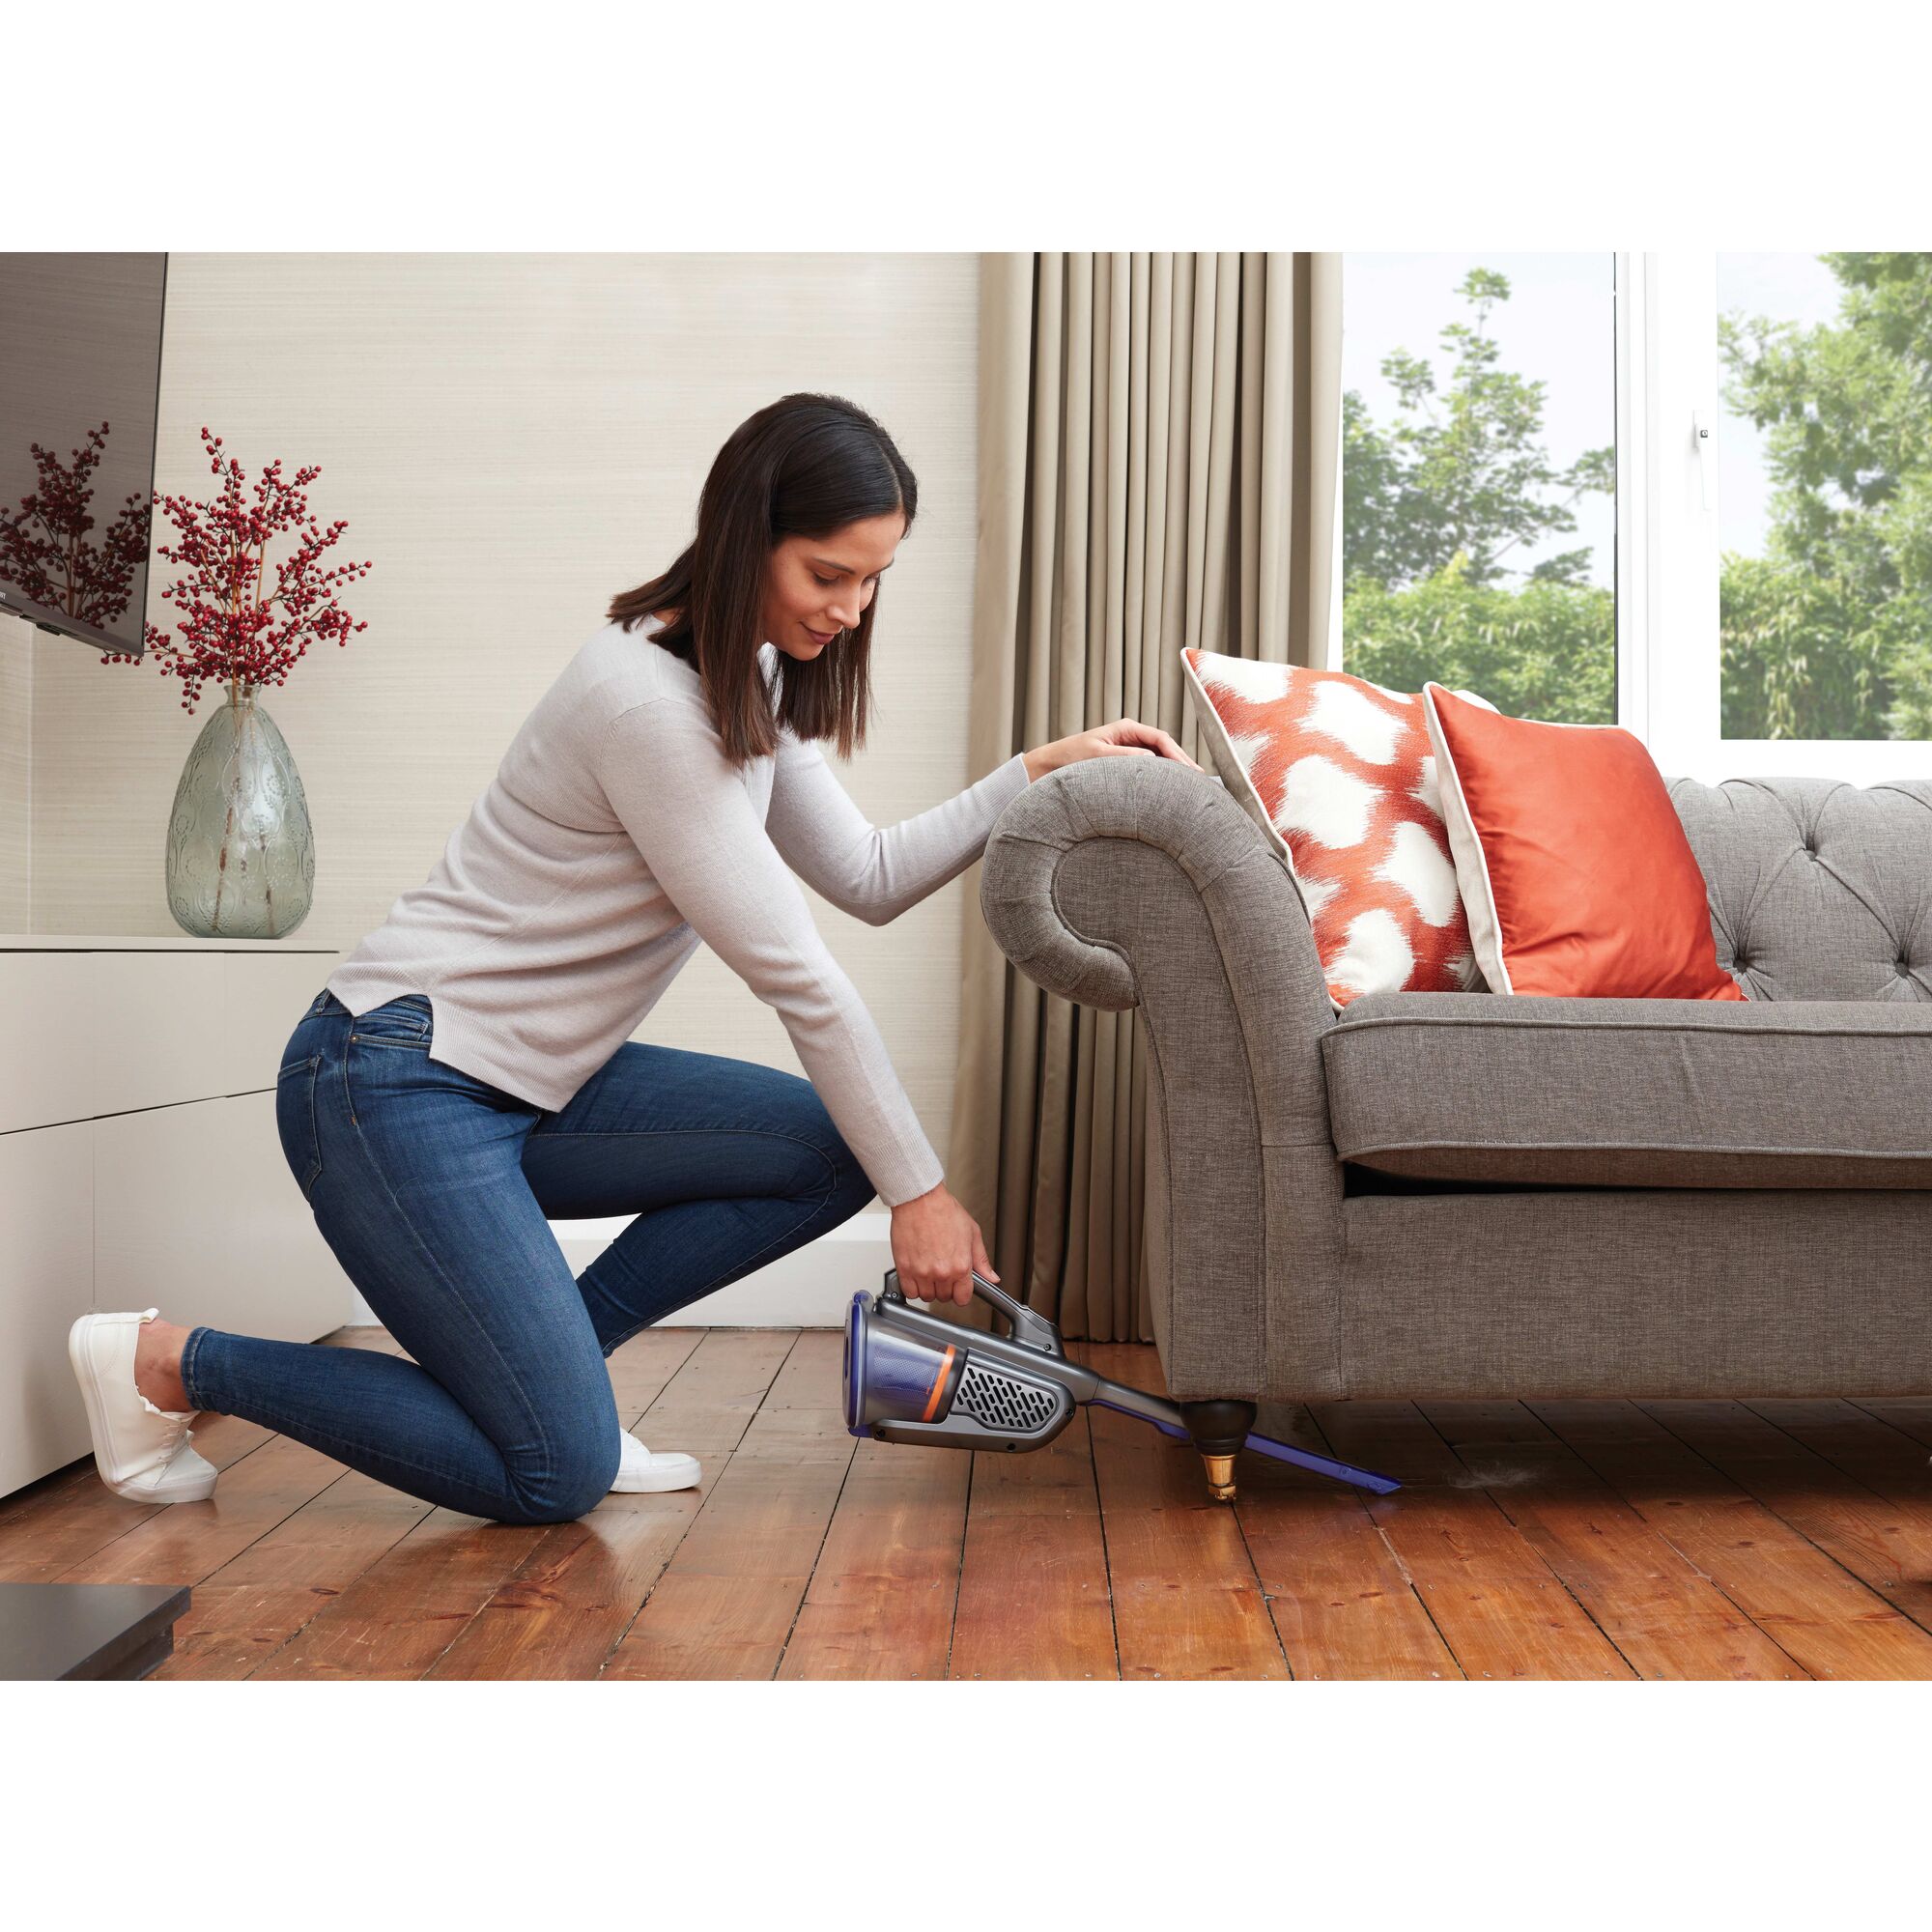 MAX Dustbuster Advanced Clean plus Pet Hand Vacuum With Base Charger and Extra Filter being used by person to clean wooden floor under sofa.